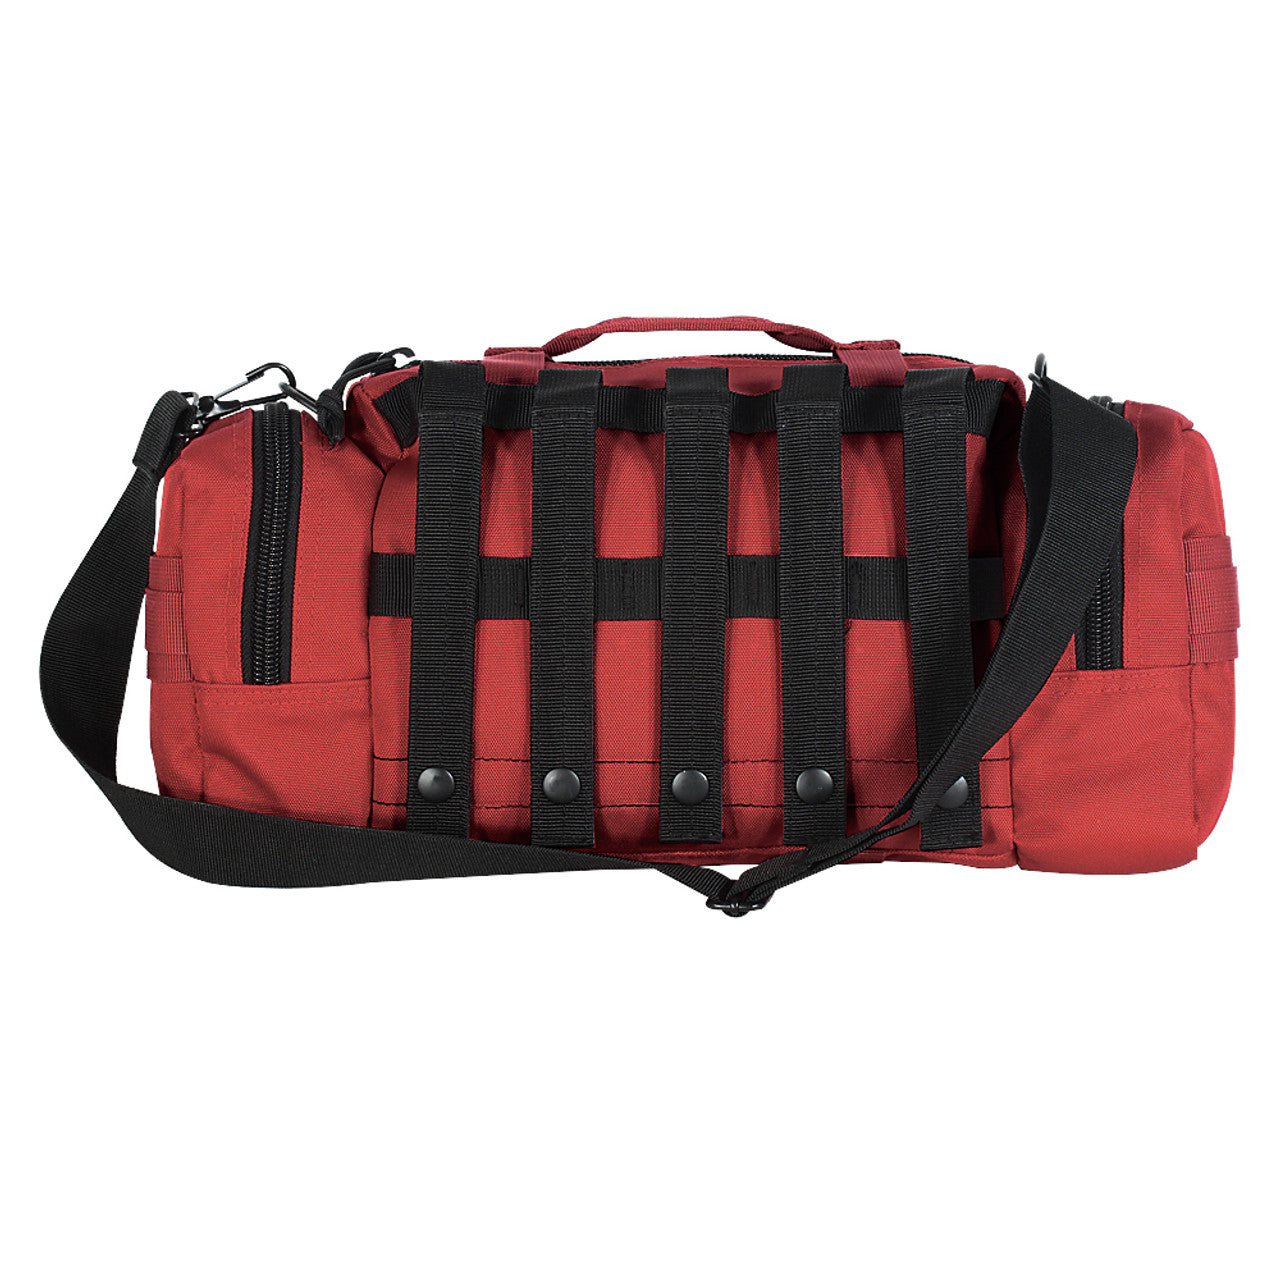 Voodoo Tactical 3-WAY Medical Deployment Bag 15-9587 - Newest Products